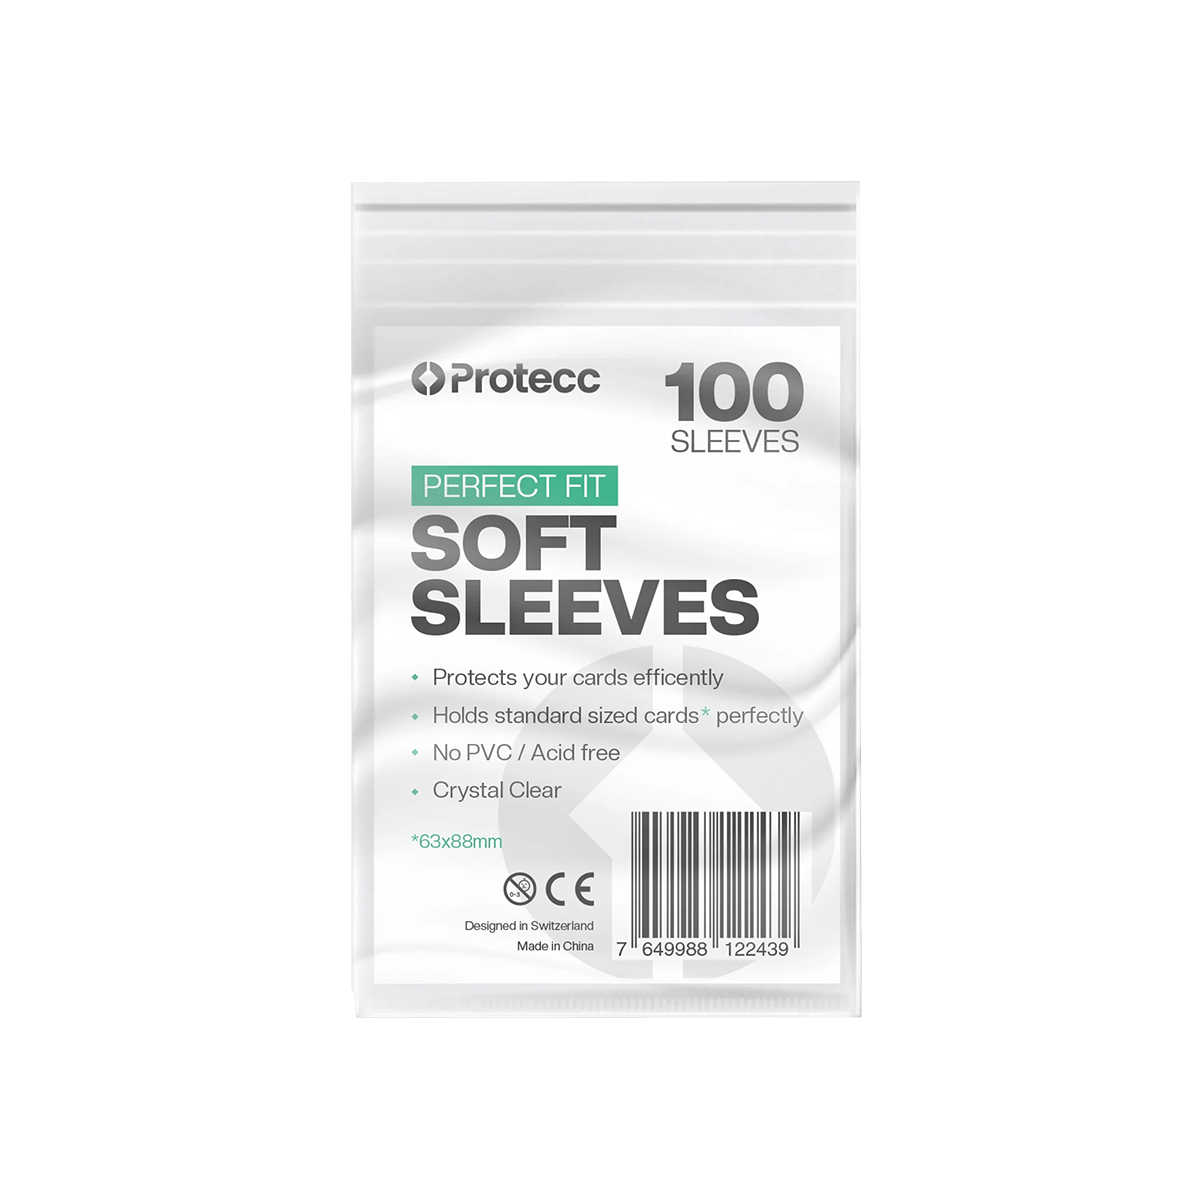 Protecc Perfect Fit Soft Sleeves - Cardmaniac.ch